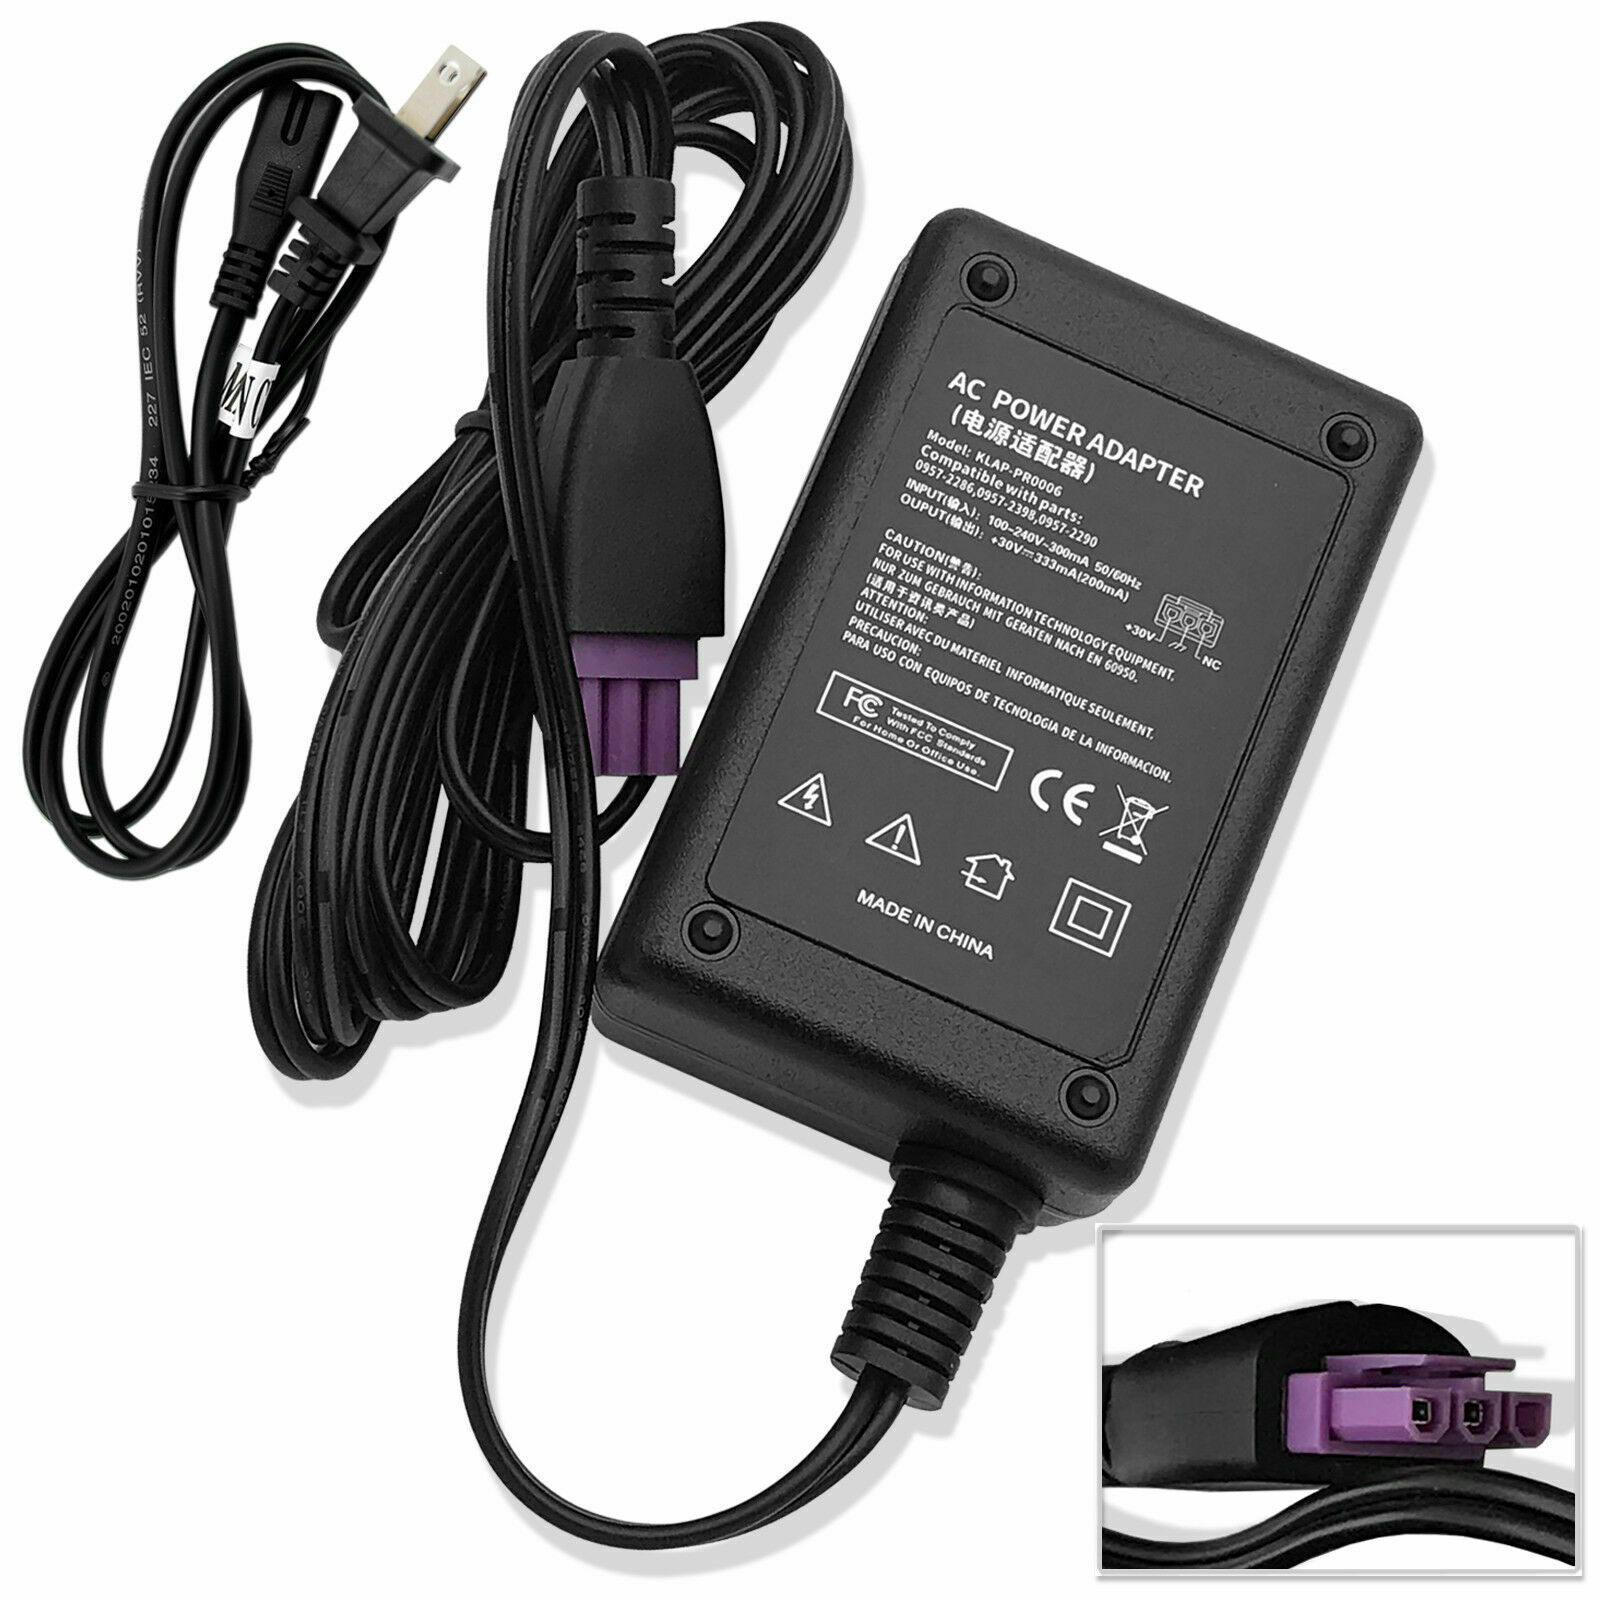 New AC Adapter Charger Power Cord For HP Deskjet 3051A 3052A 3054 3055A Printer Compatible Brand: For HP Type: AC Ada - Click Image to Close